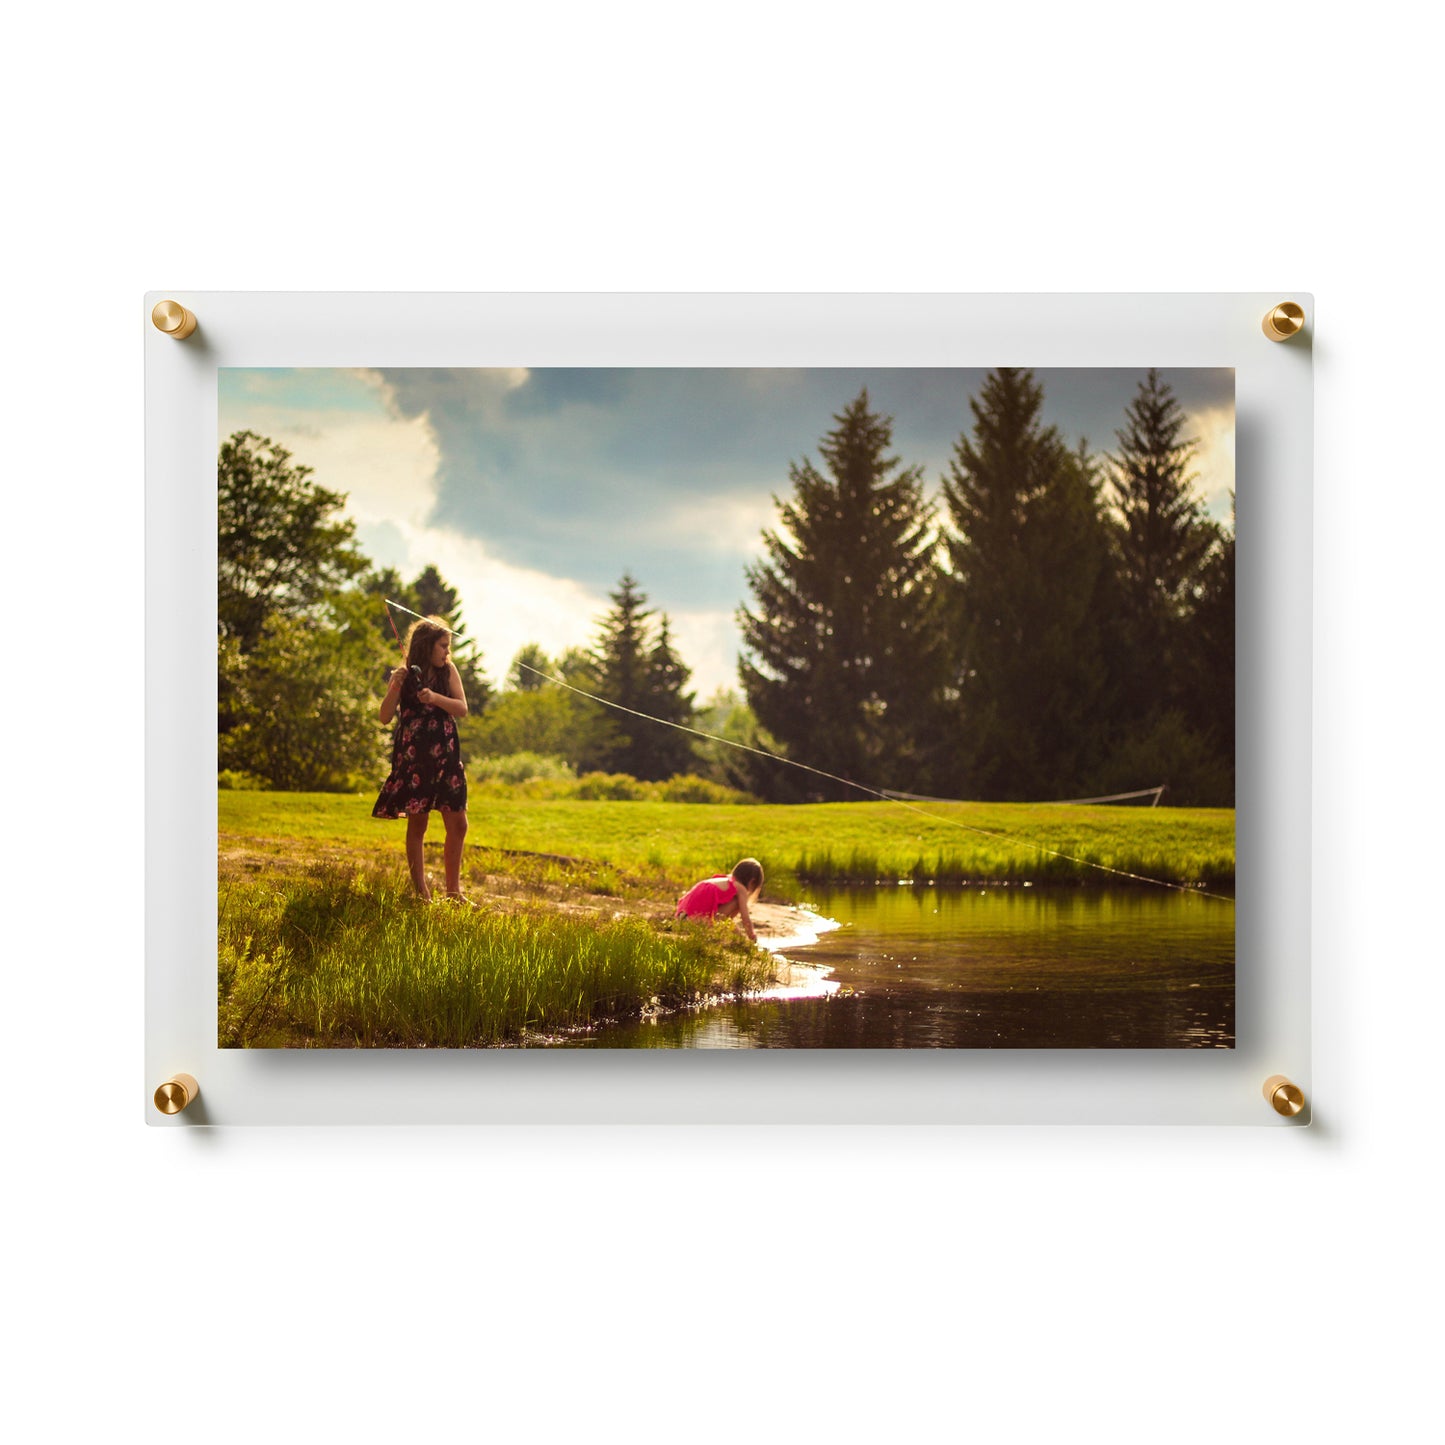 11x17" Photo Floating Acrylic Clear Picture Frame (Frame Size 15x21")